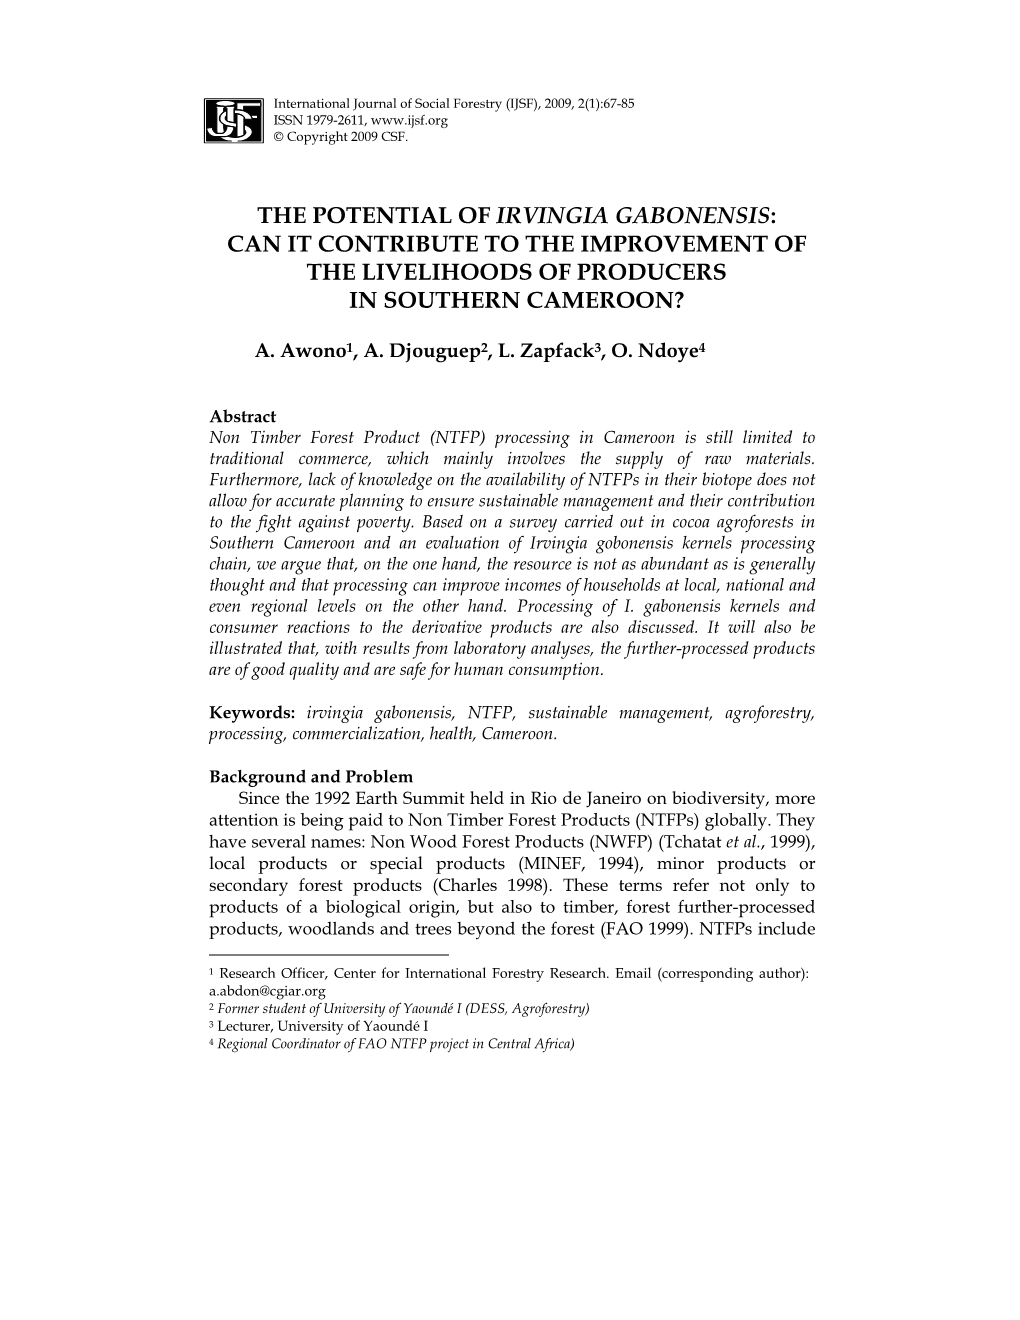 The Potential of Irvingia Gabonensis: Can It Contribute to the Improvement of the Livelihoods of Producers in Southern Cameroon?